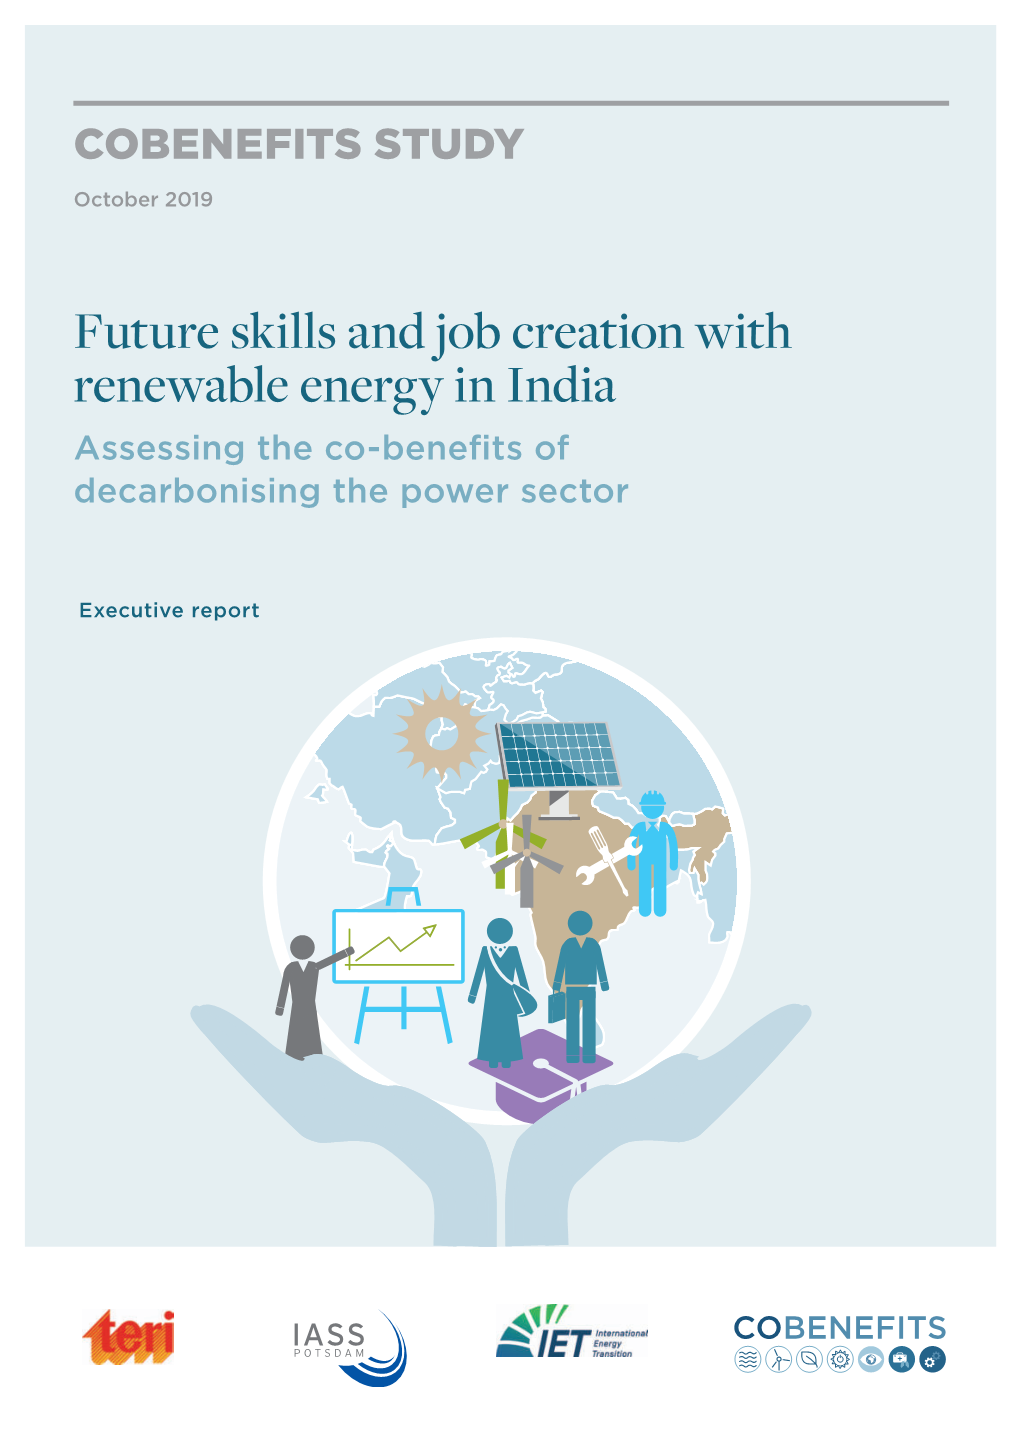 Future Skills and Job Creation with Renewable Energy in India Assessing the Co-Beneﬁts of Decarbonising the Power Sector